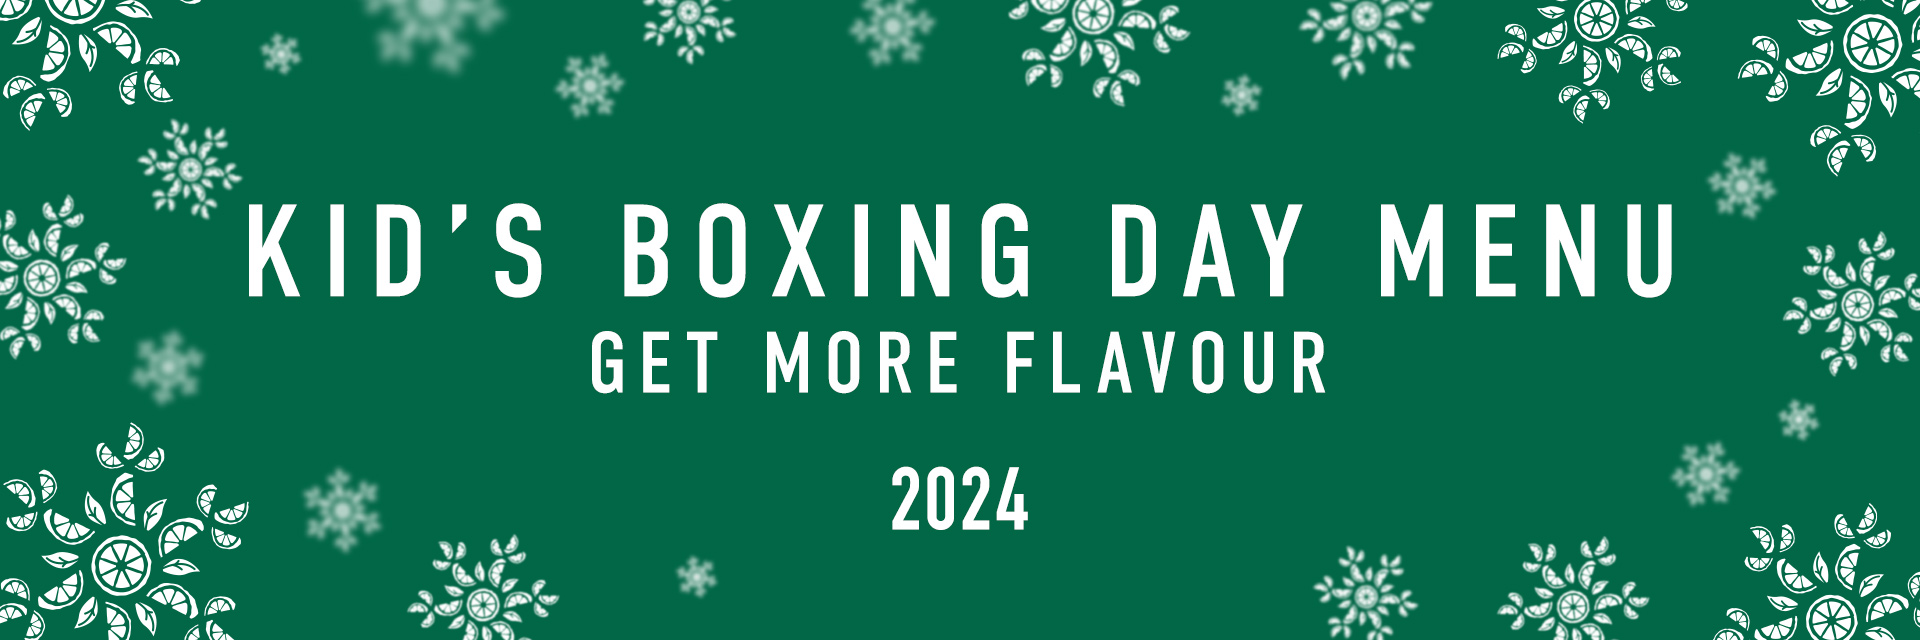 The Orchard Kids Boxing Day Menu  - Harvester 